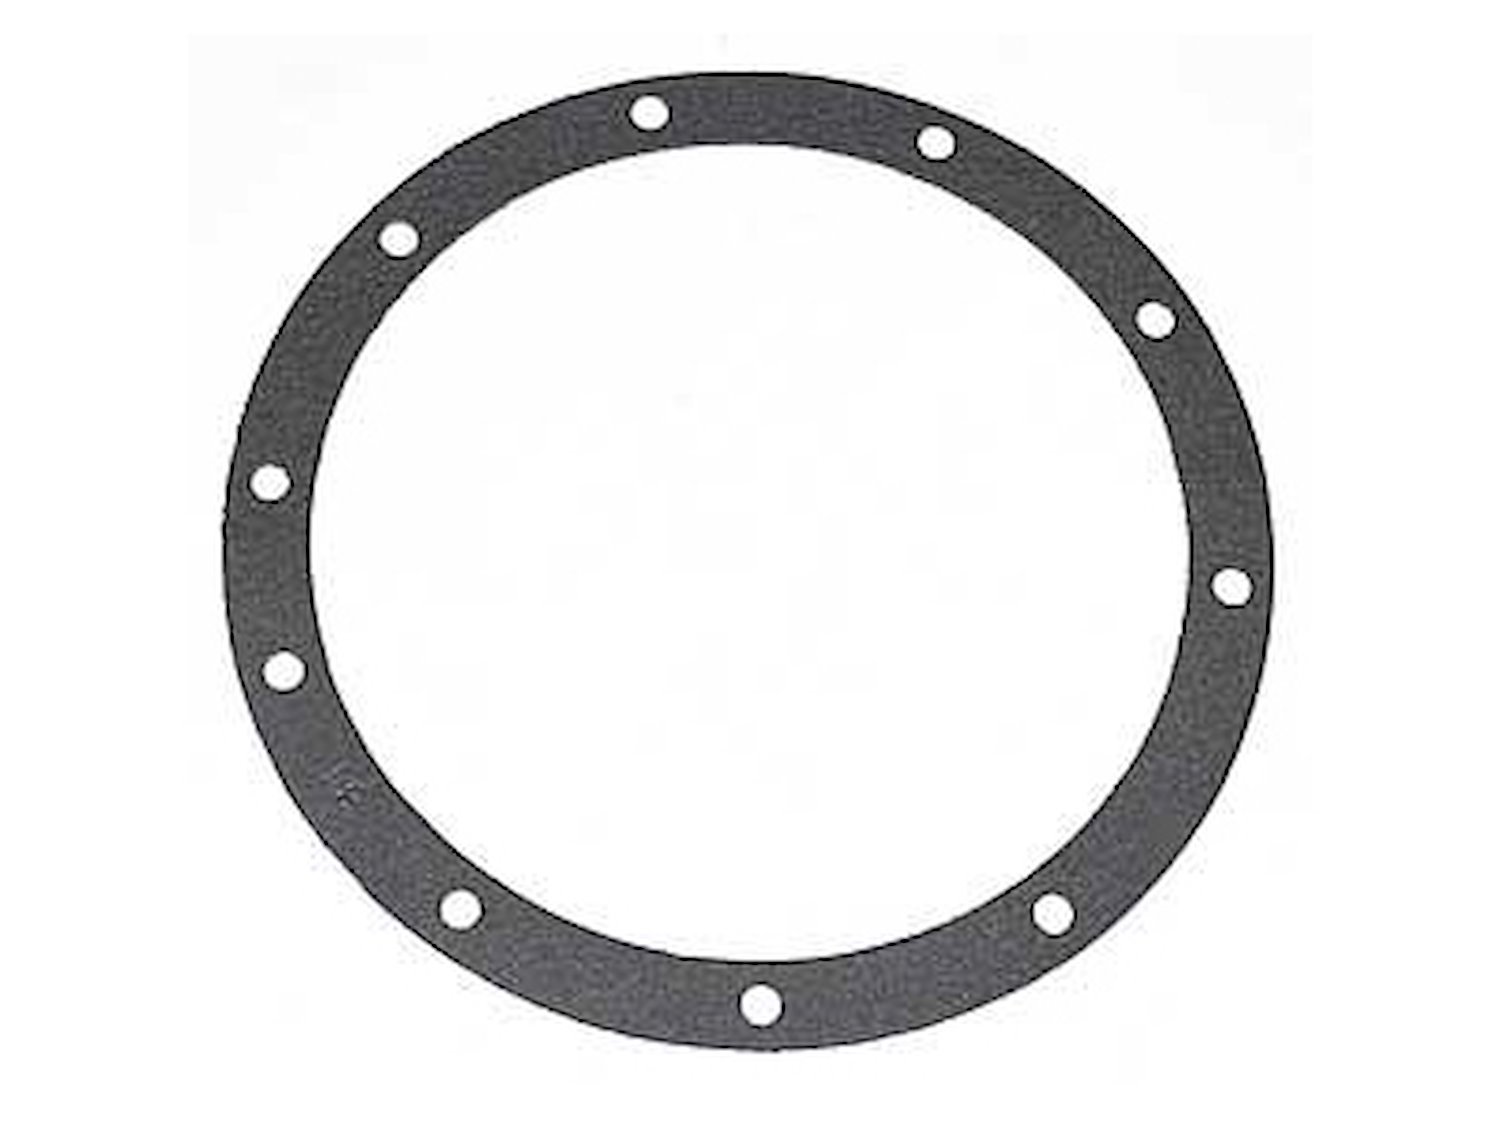 Differential Cover Gasket 1957-64 Chrysler 8.75"